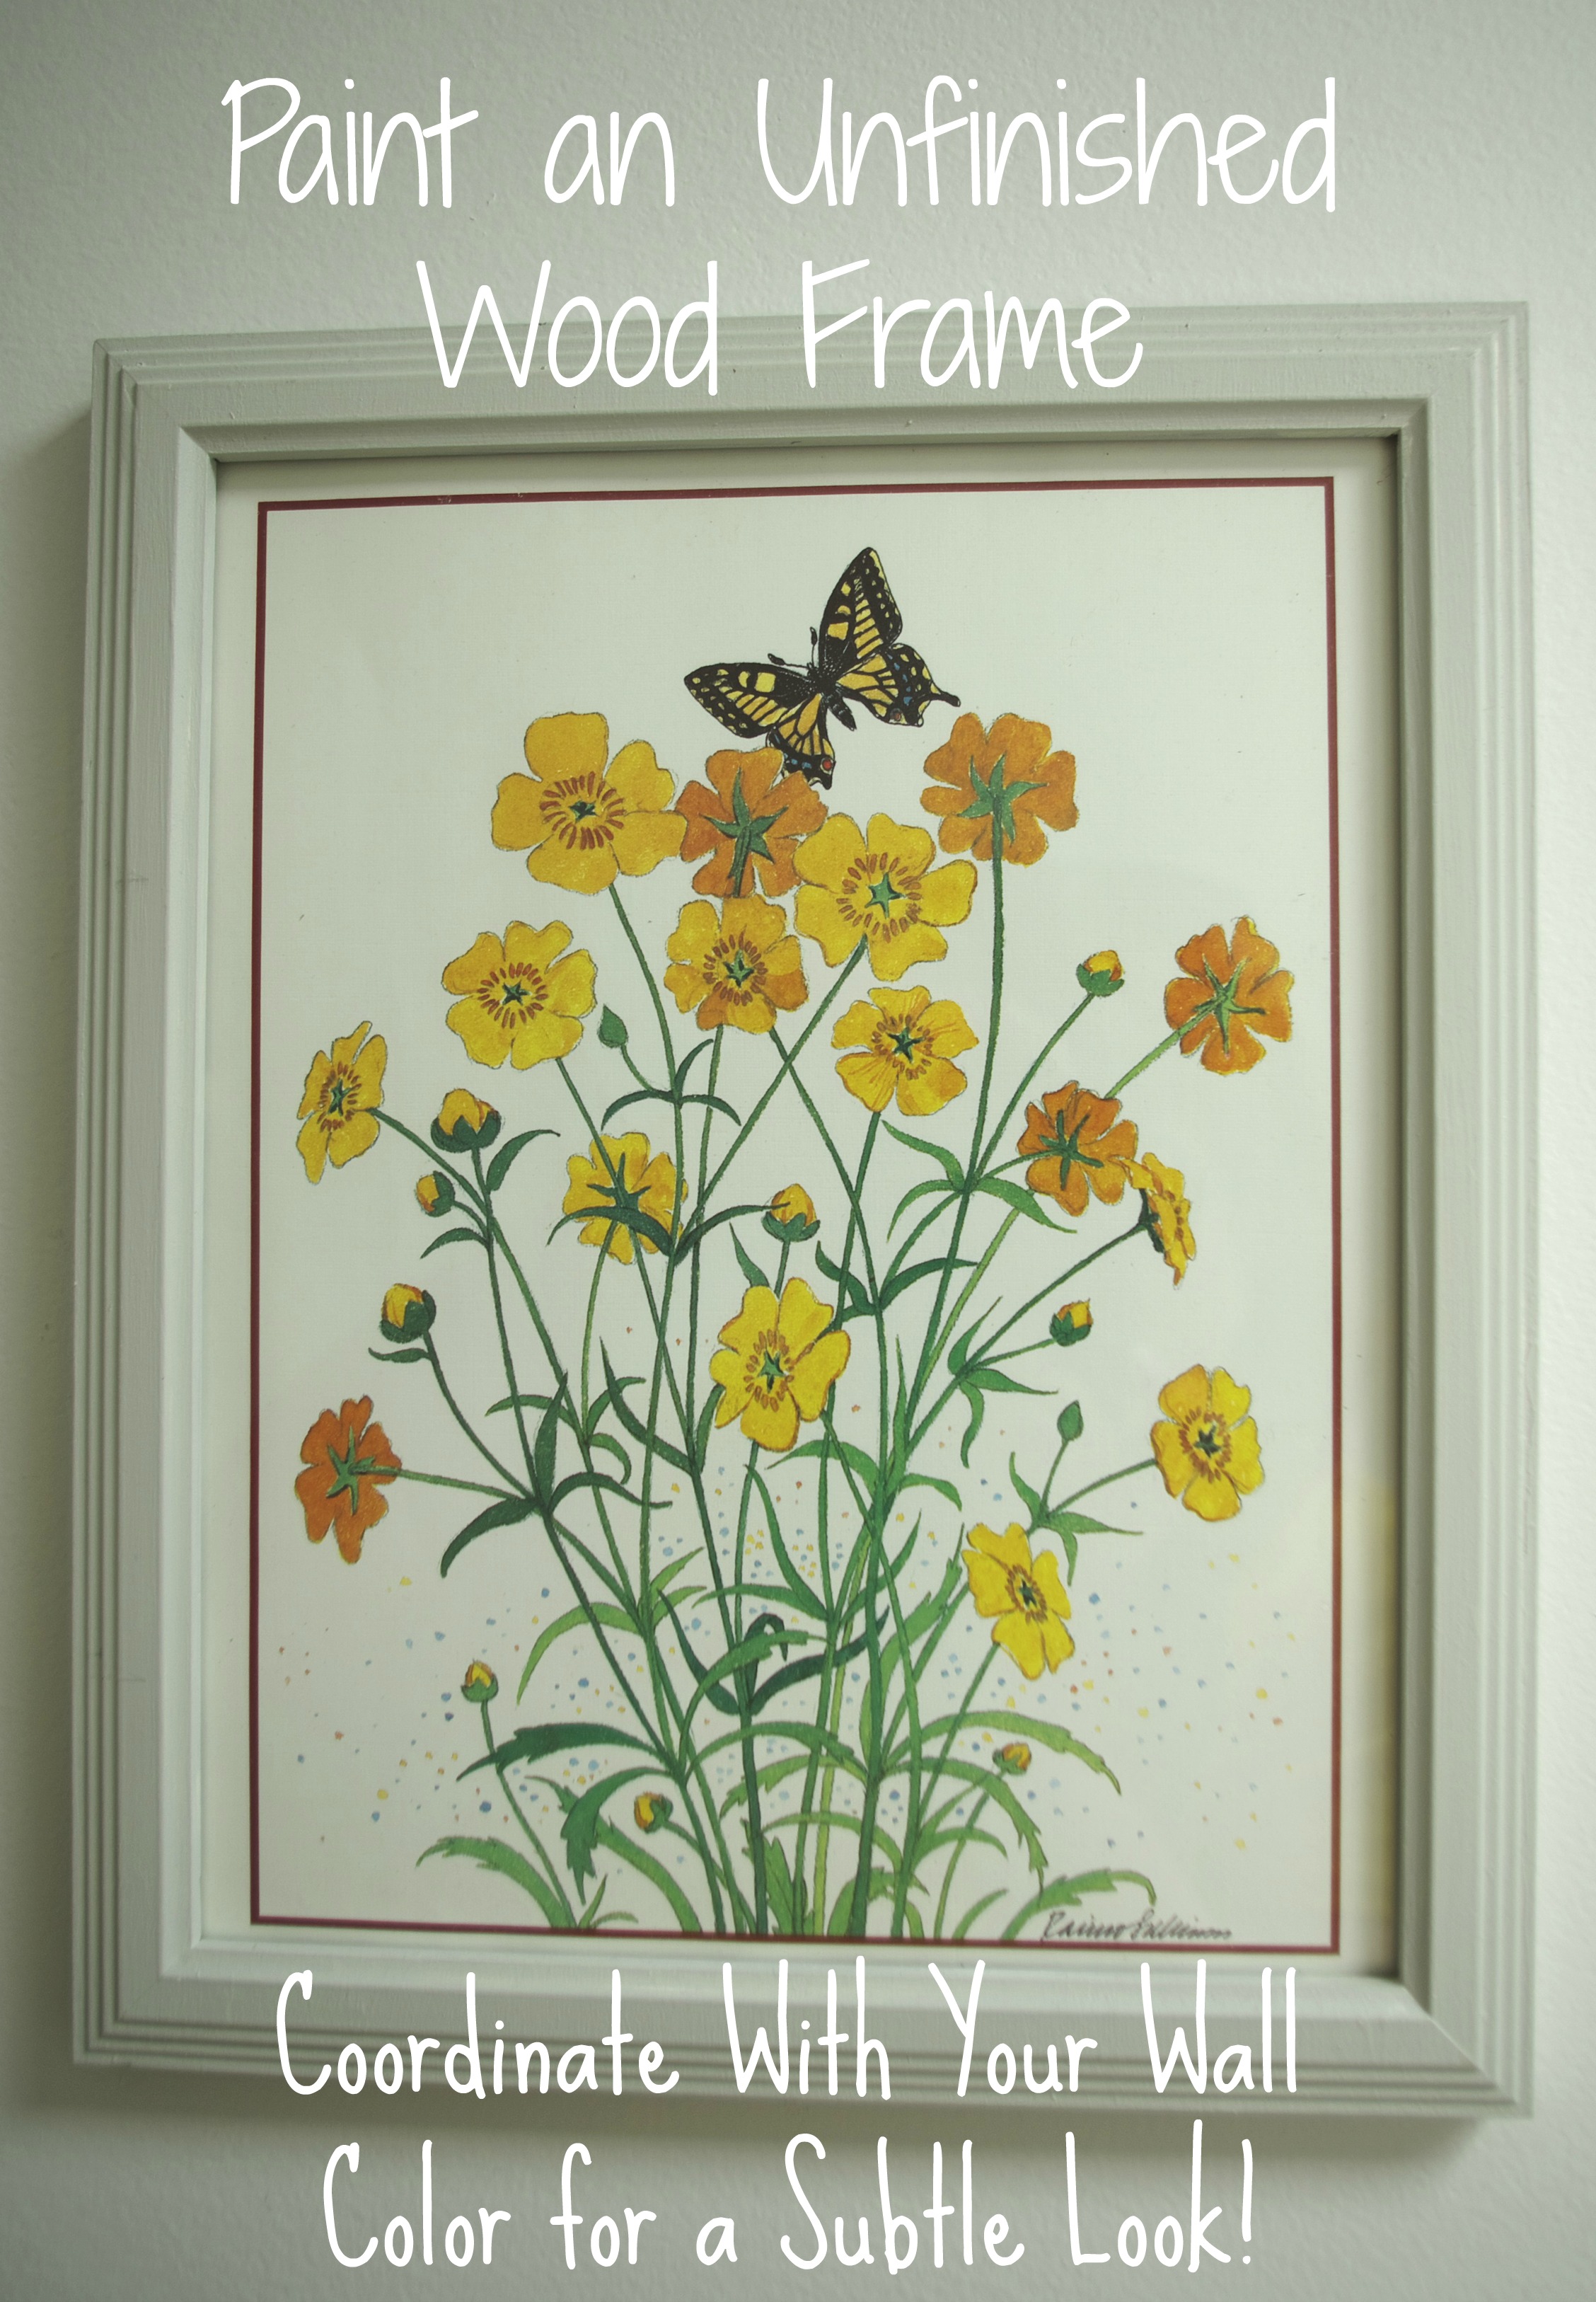 Unfinished Wood Frames - Paint Them in a Coordinating Color - Time